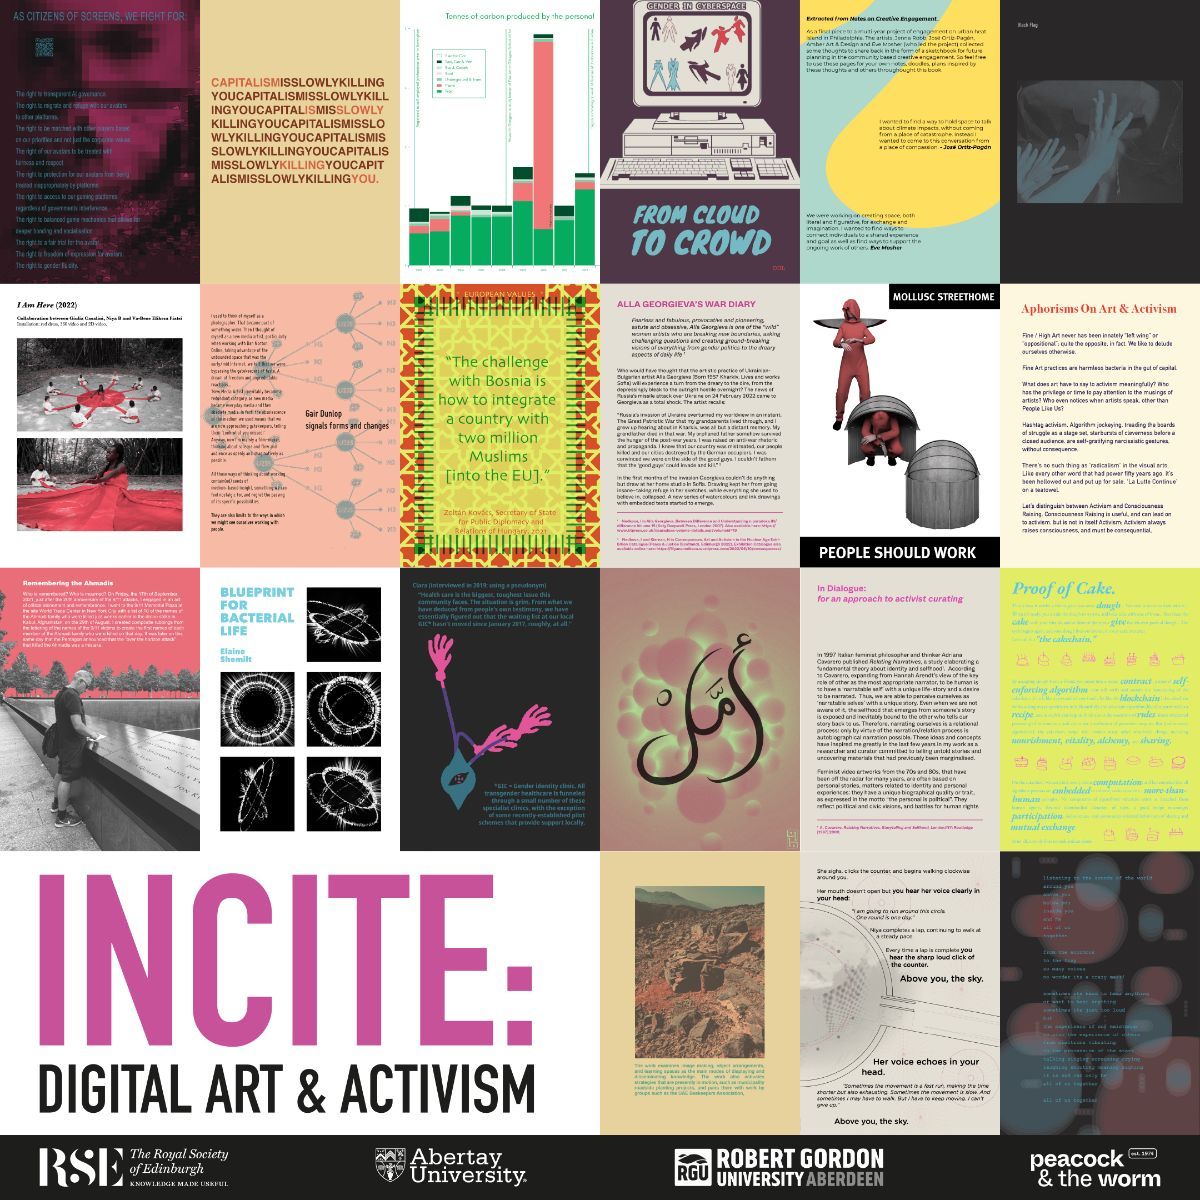 🔖 Check out the new book 'INCITE: Digital Art & Activism,' published by Peacock and the Worm. Edited by Joseph DeLappe and Laura Leuzzi, this innovative book is a must-have for anyone interested in the convergence of art and activism. Link in usual place